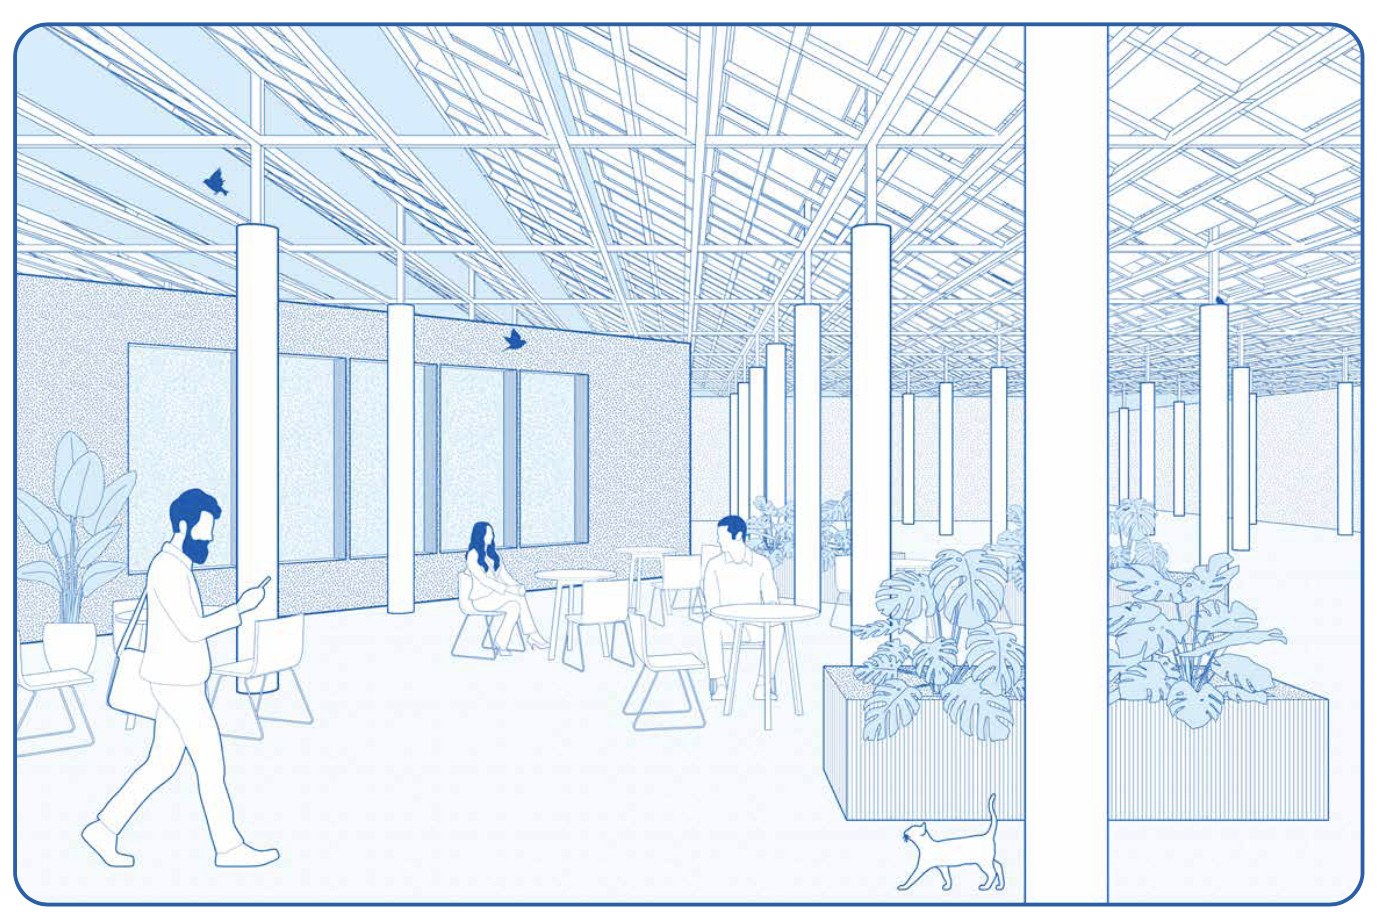 Connor Little and Merrie Afseth's thesis: the plaza program surfaces rendering